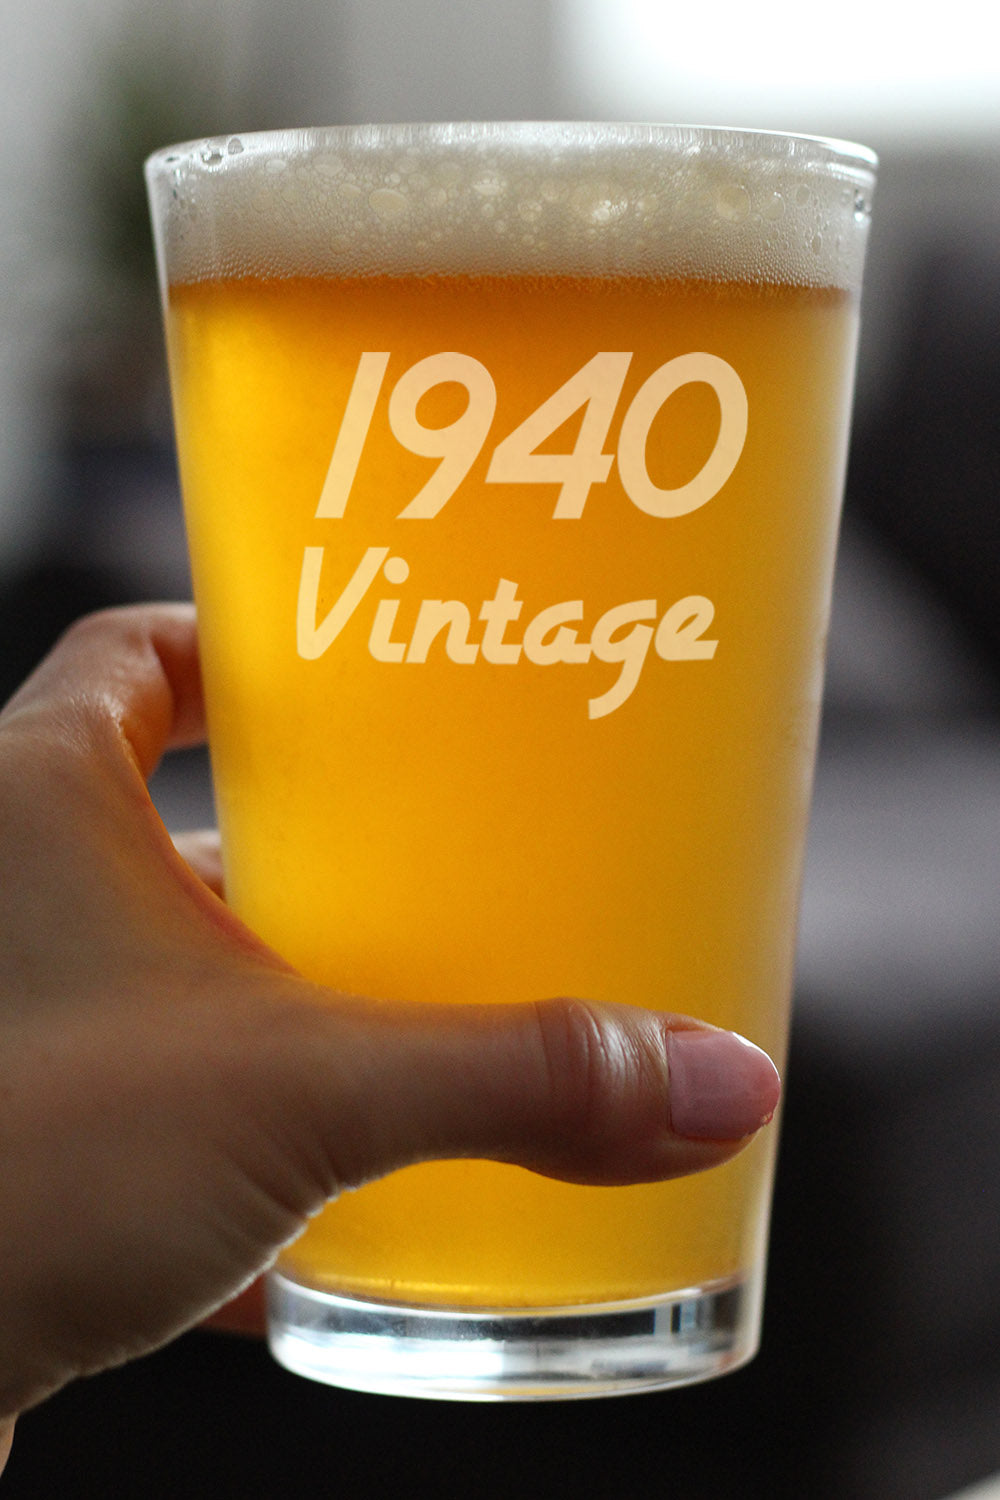 Vintage 1940 - Pint Glass for Beer - 83rd Birthday Gifts for Men or Women Turning 83 - Fun Bday Party Decor - 16 oz